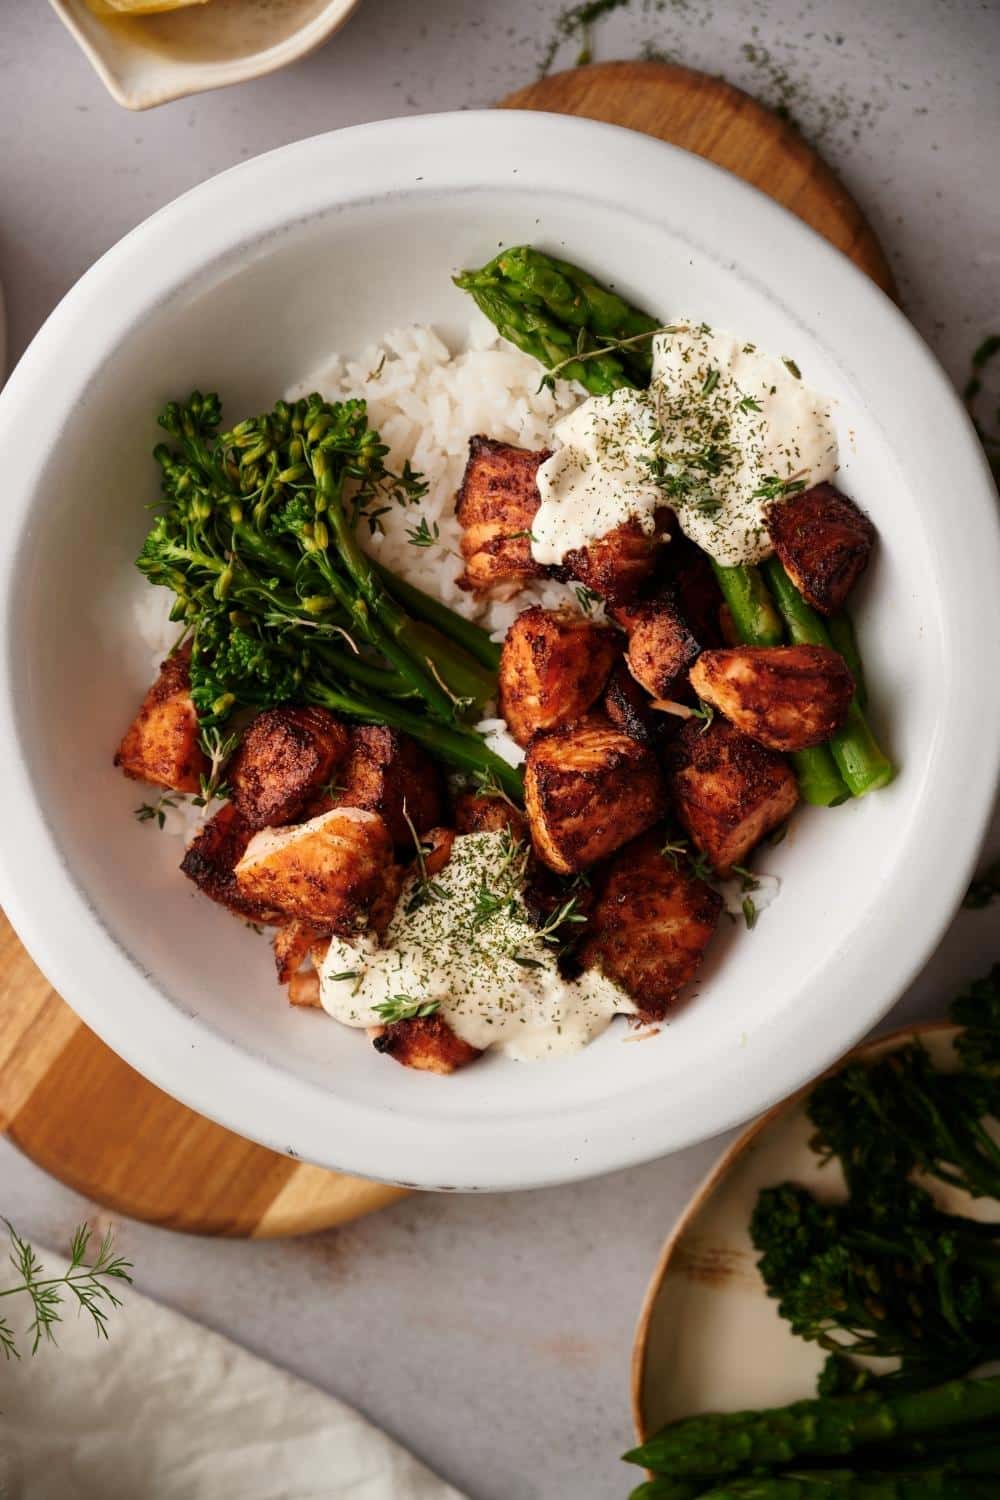 Air fryer salmon bites rice bowl. The bowl is filled with white rice topped with steamed asparagus and broccolini on either side with dollops of dill sauce and a generous serving of air fried salmon bites.